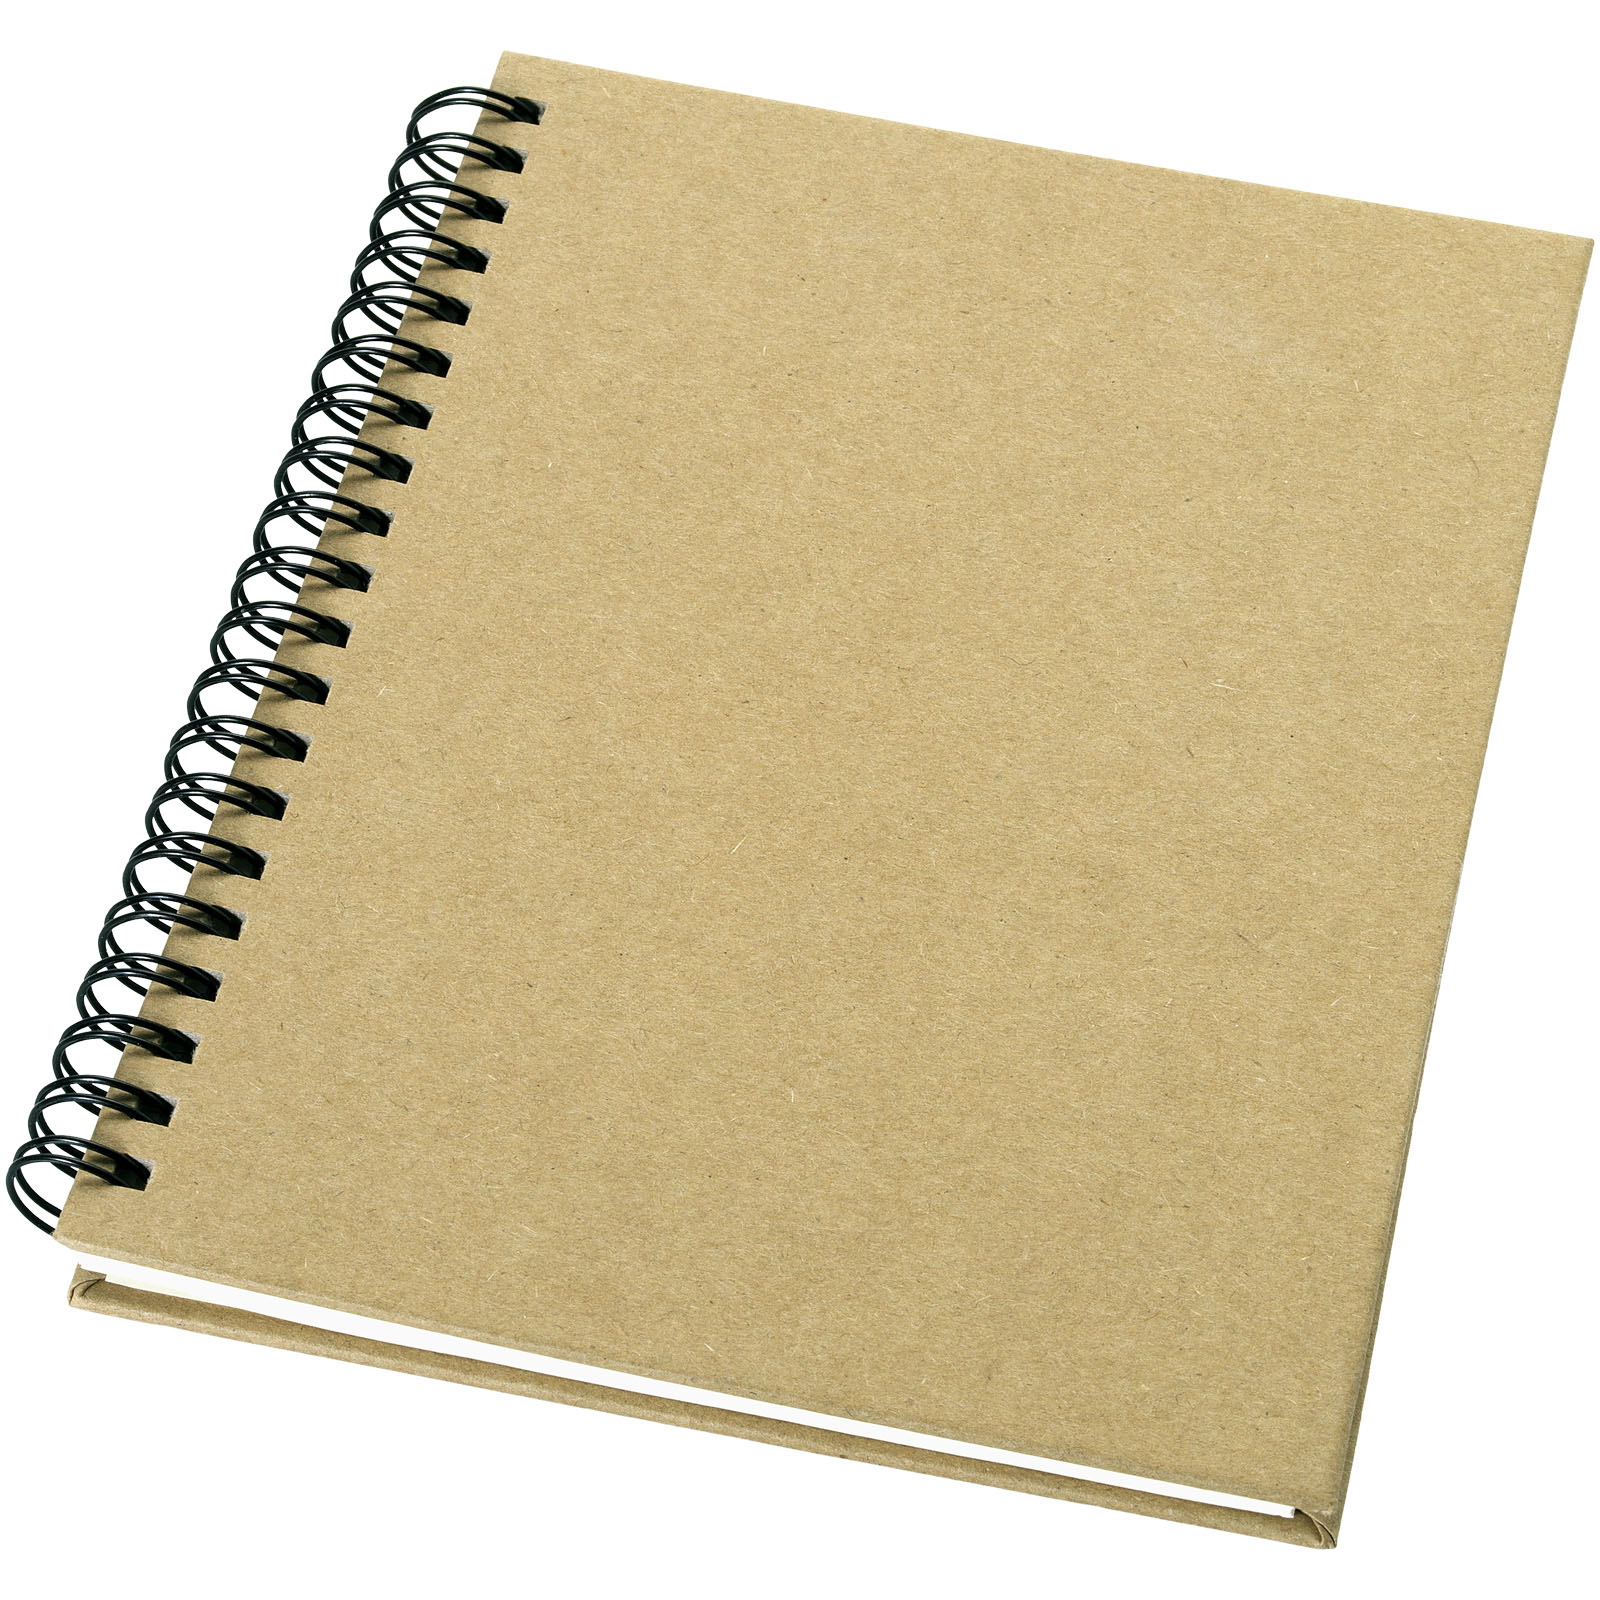 Hard cover notebooks - Mendel recycled notebook